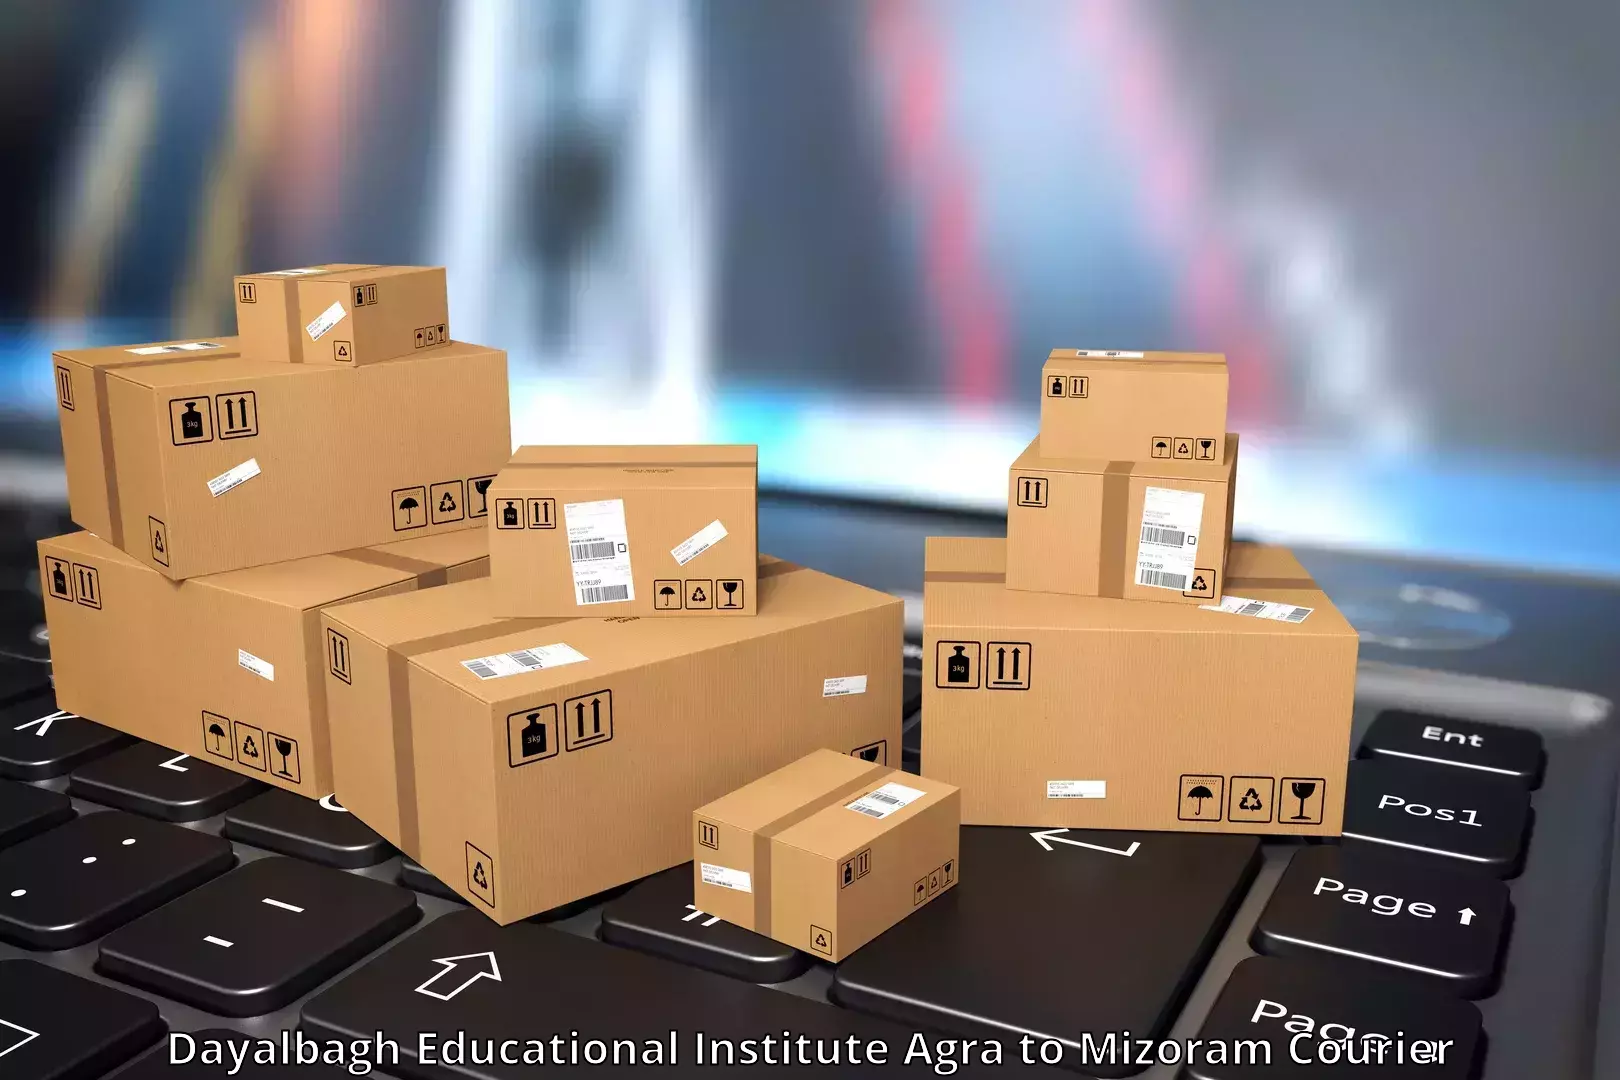 Affordable parcel service Dayalbagh Educational Institute Agra to Lunglei